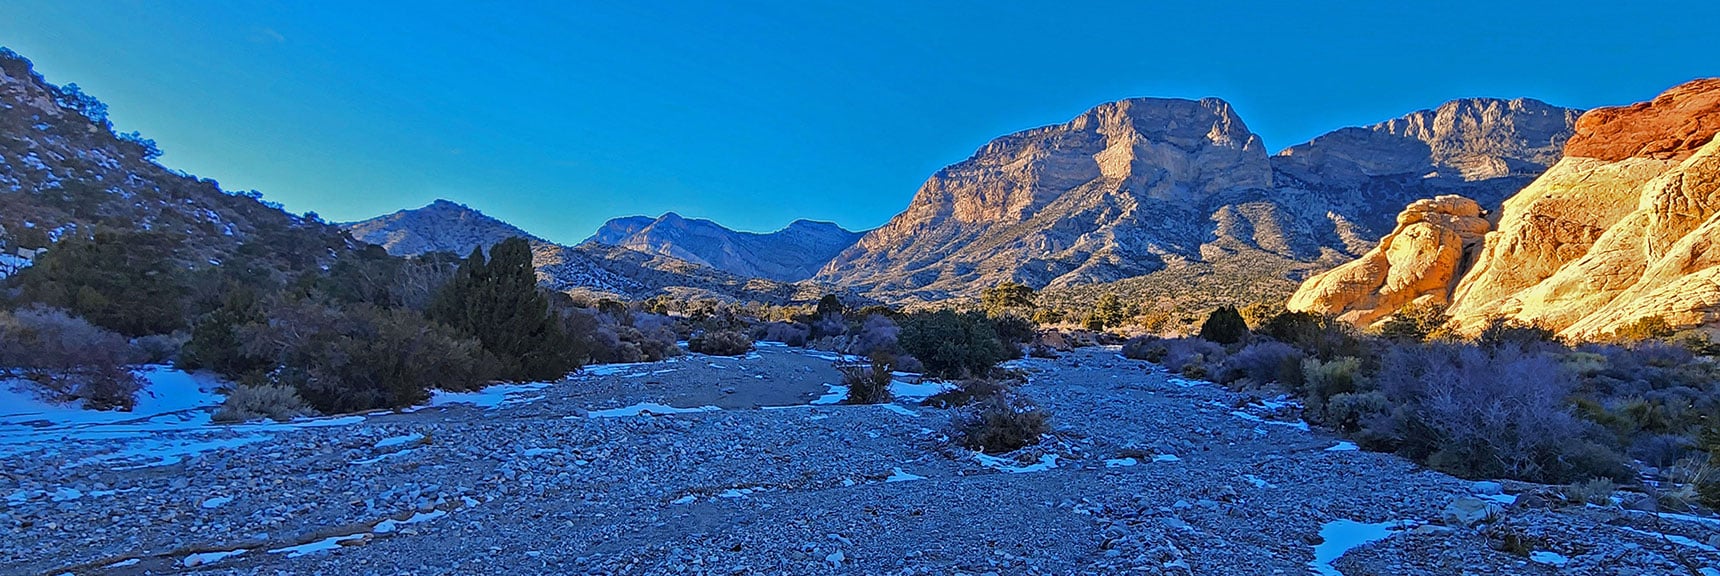 View Back Up to La Madre Ridgeline in Late Afternoon Light. | 3 Basin Circuit | Calico Basin, Brownstone Basin, Red Rock Canyon, Nevada